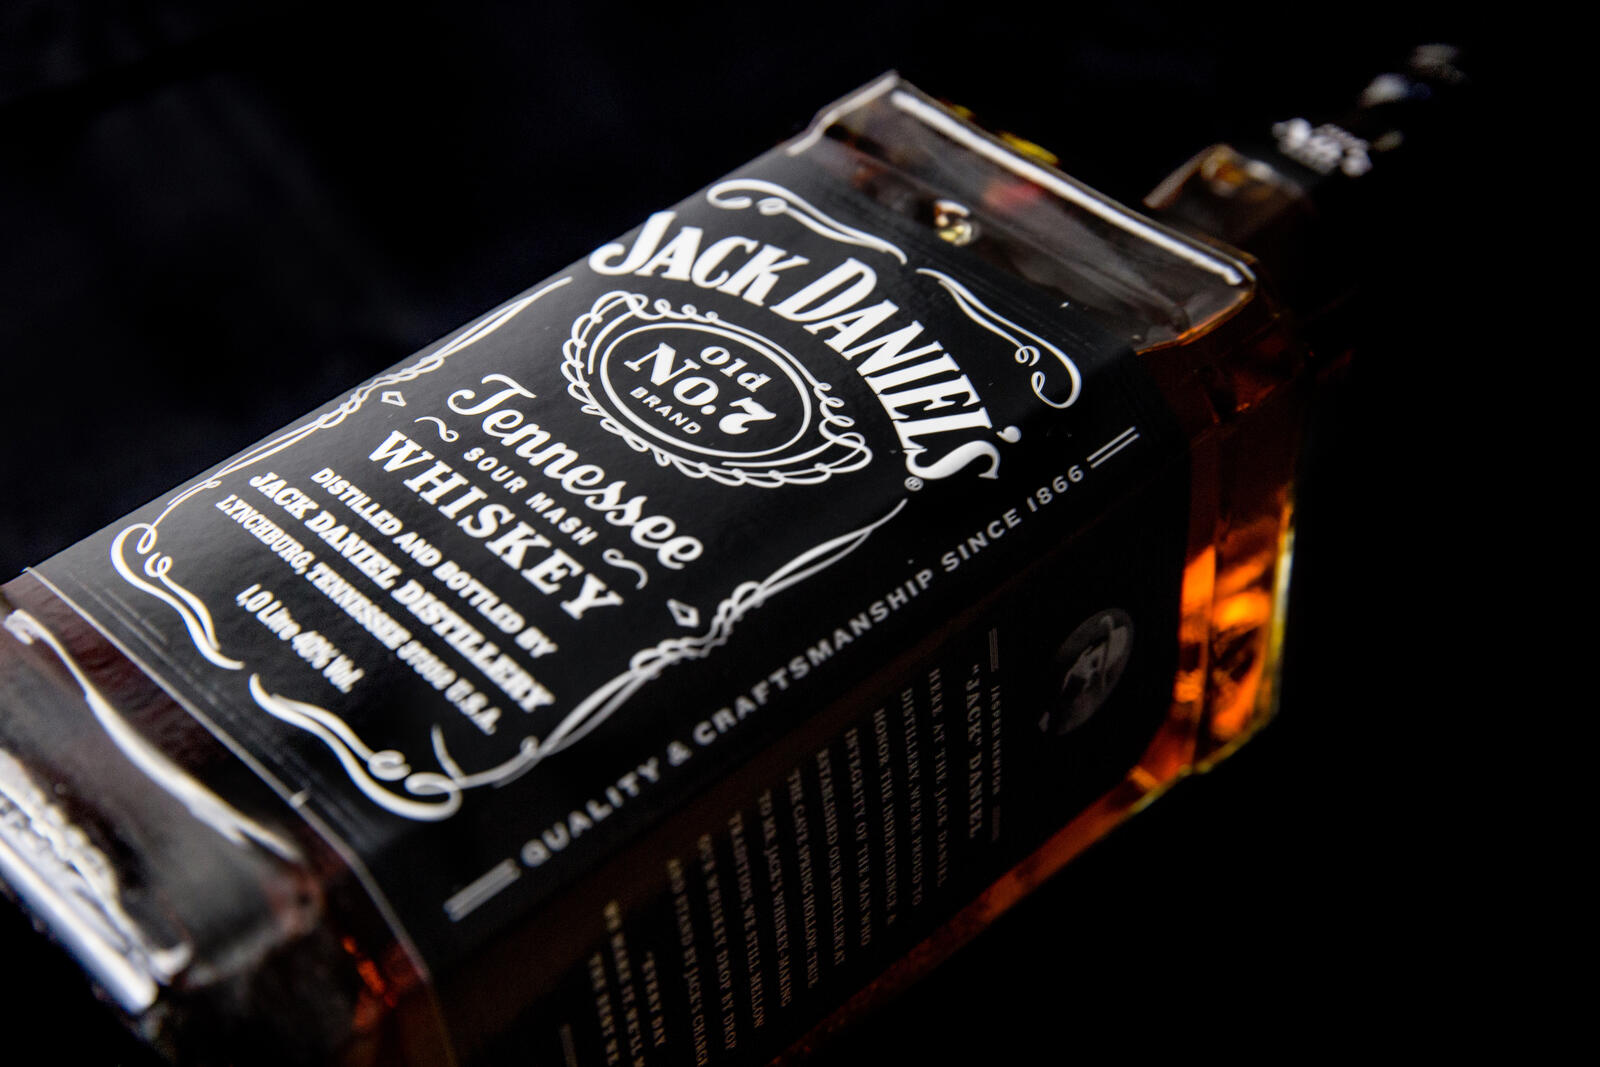 Free photo A bottle of expensive Jack Daniels whiskey